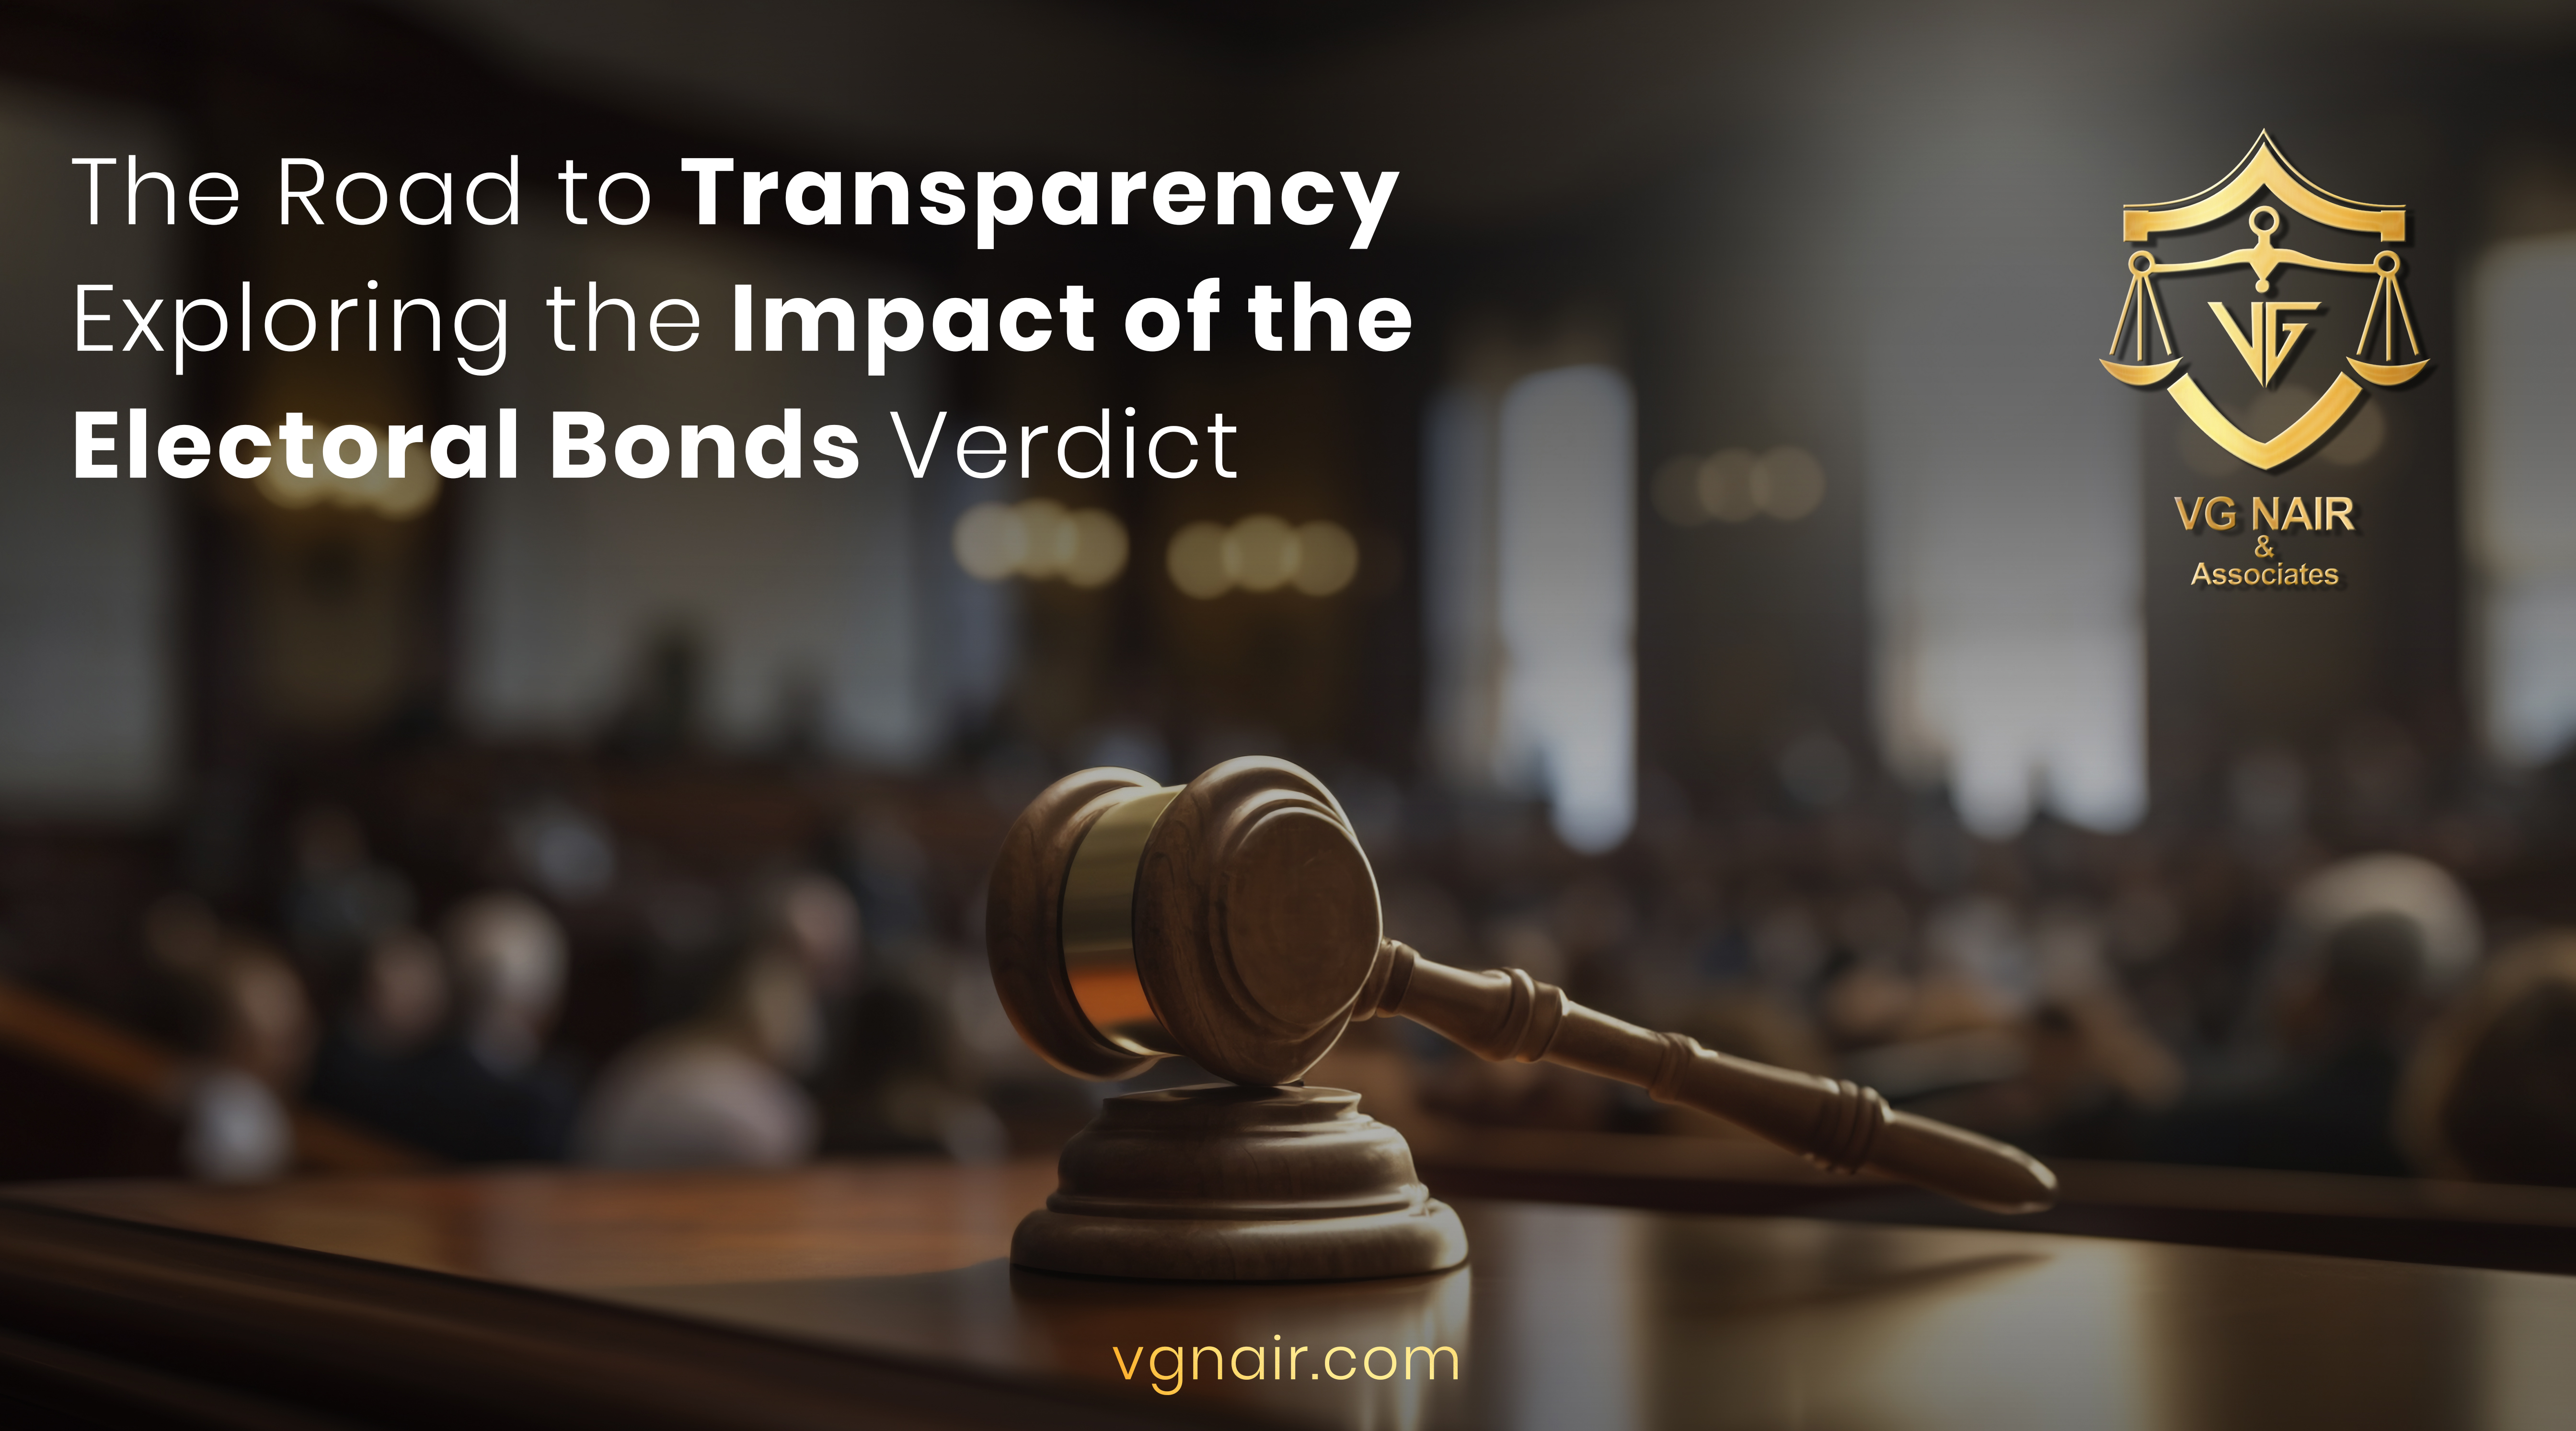 The Road to Transparency: Exploring the Impact of the Electoral Bonds Verdict